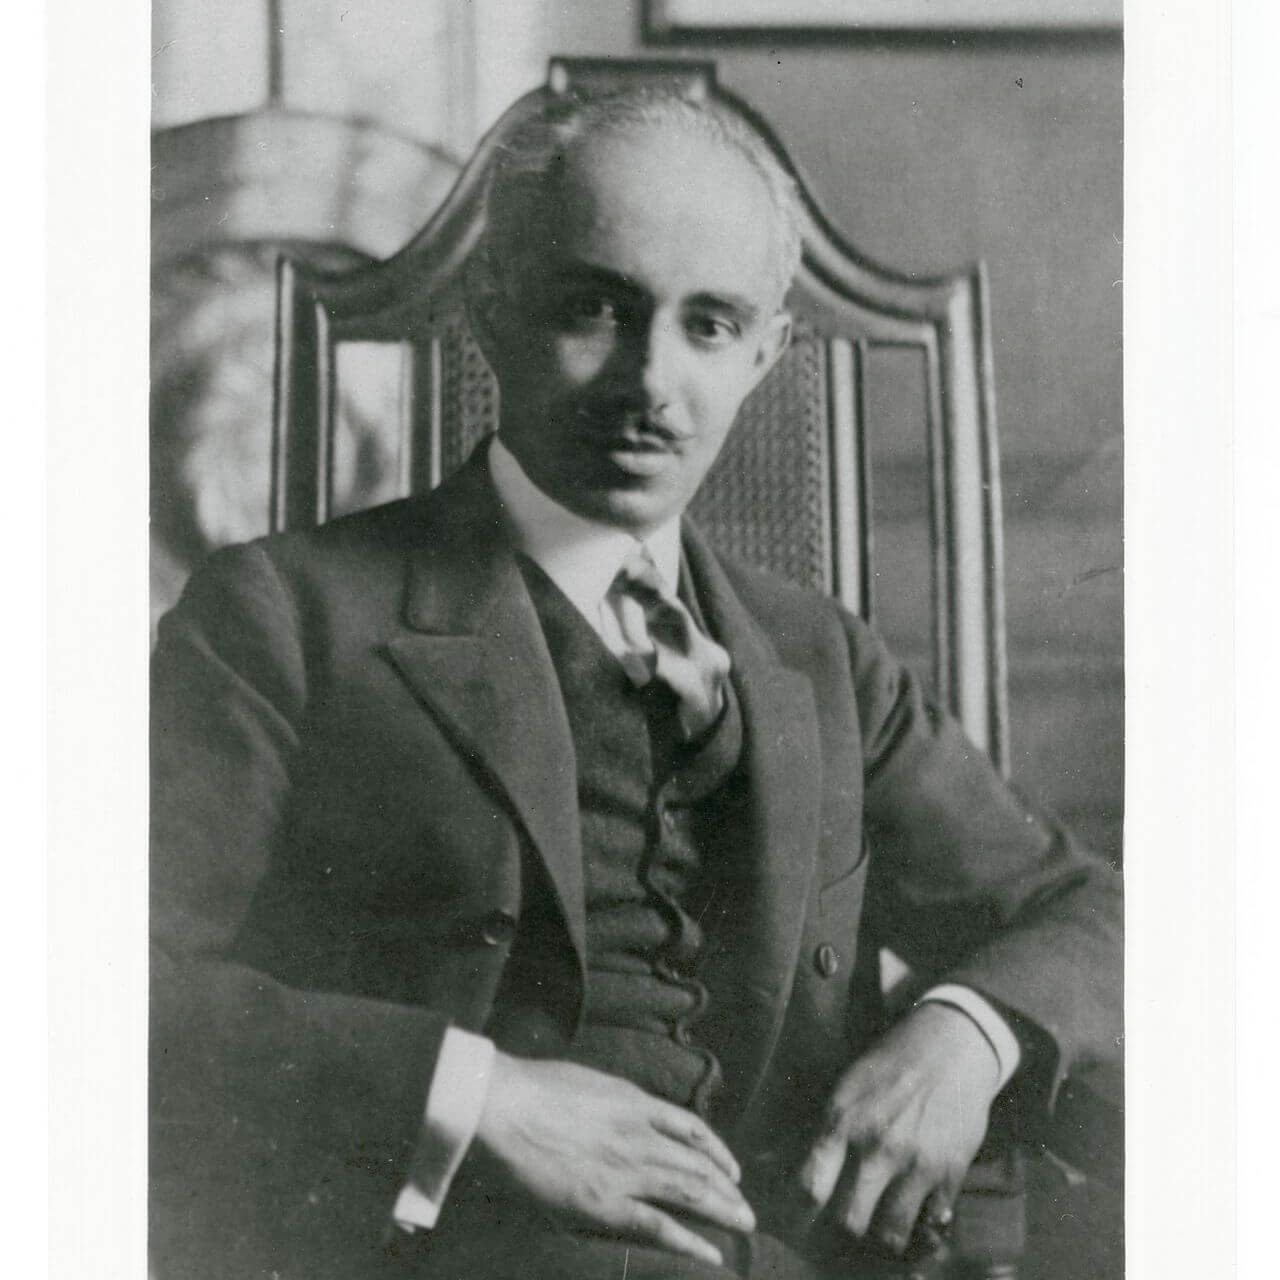 Old black and white photograph of Julian Abele sitting